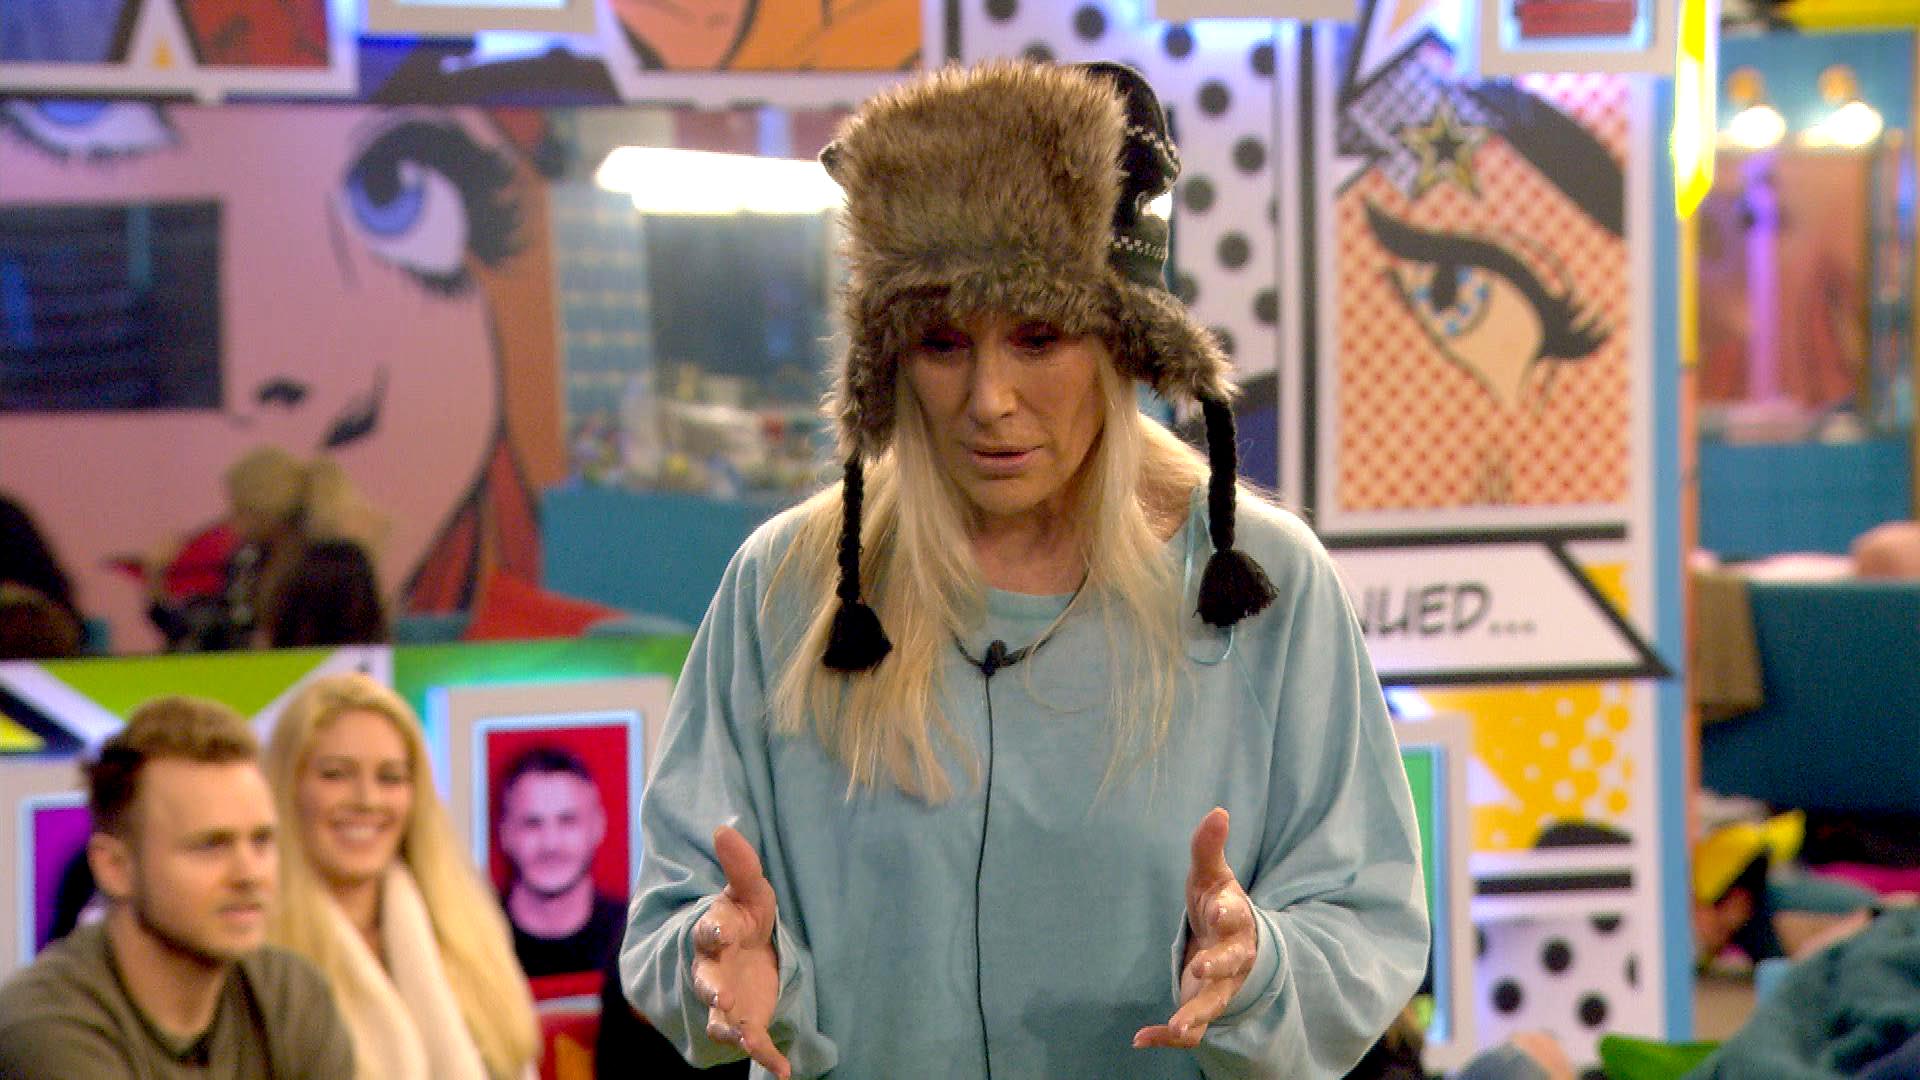 Day 8: Angie brings in her detox plan in the latest CBB task